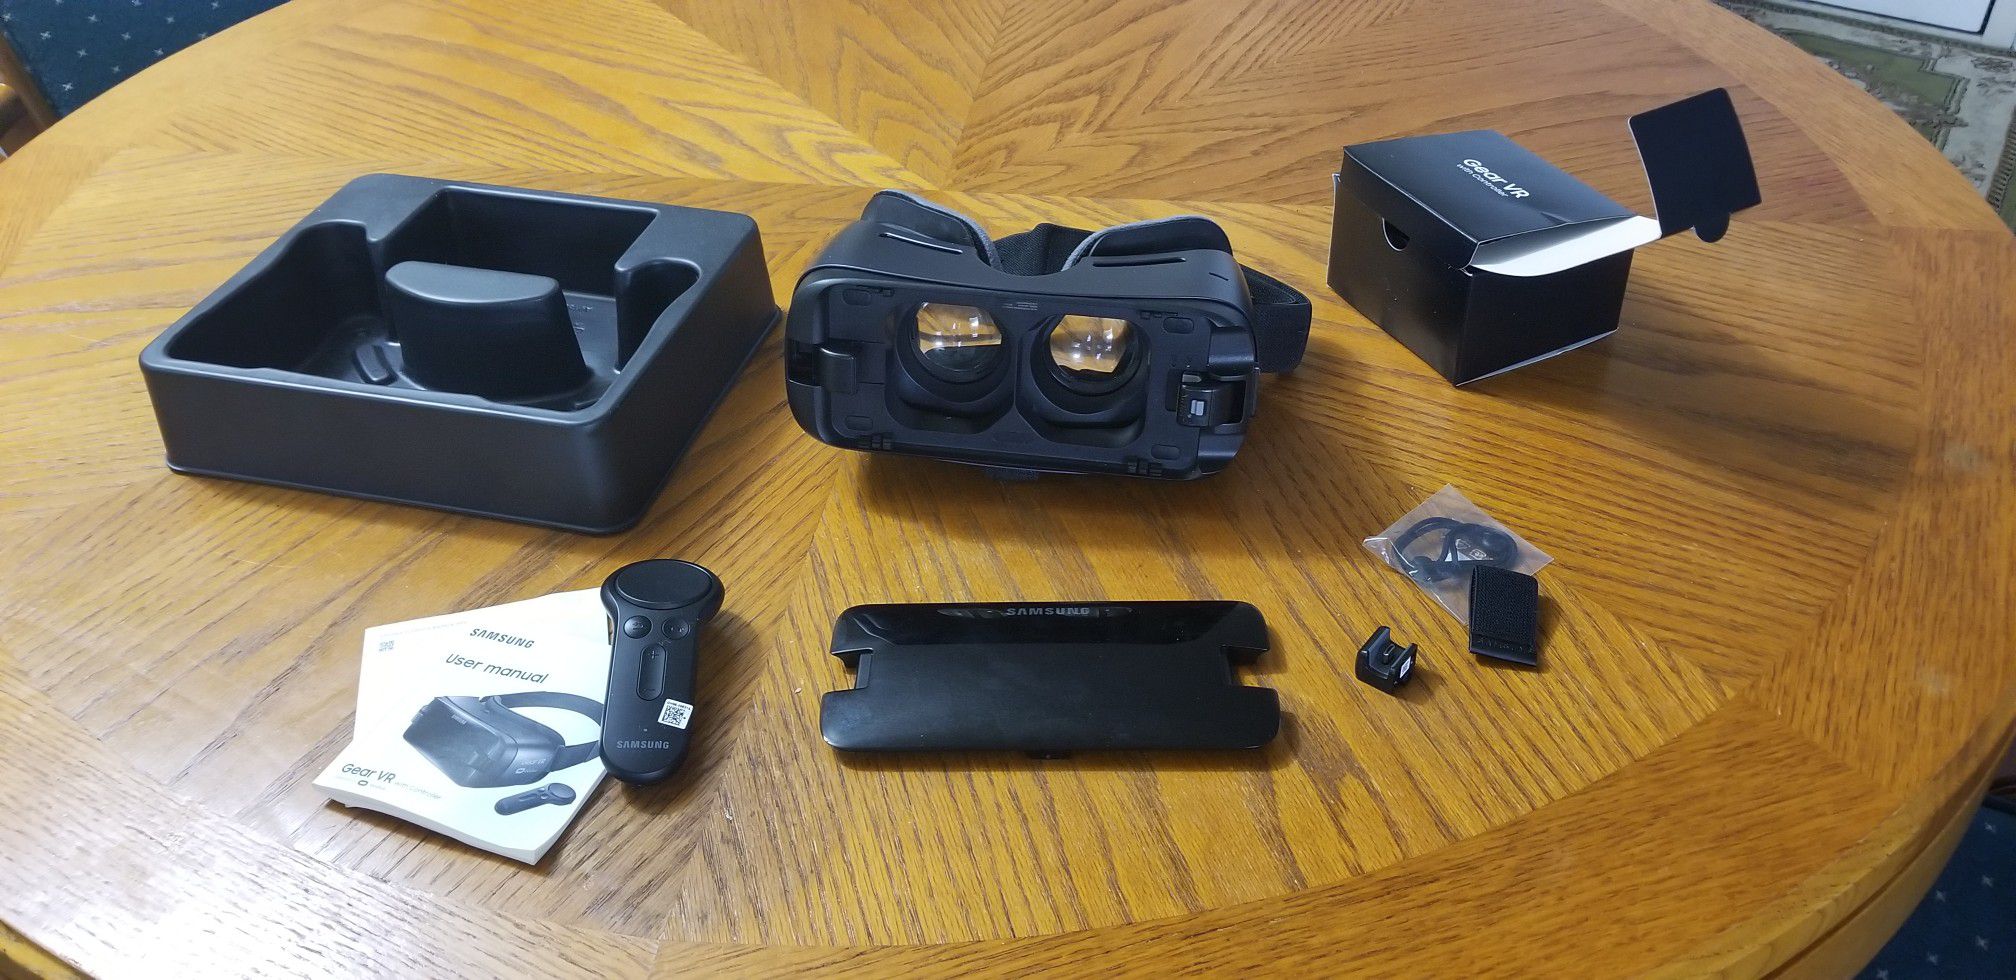 Samsung Gear Vr, barely used. Excellent condition